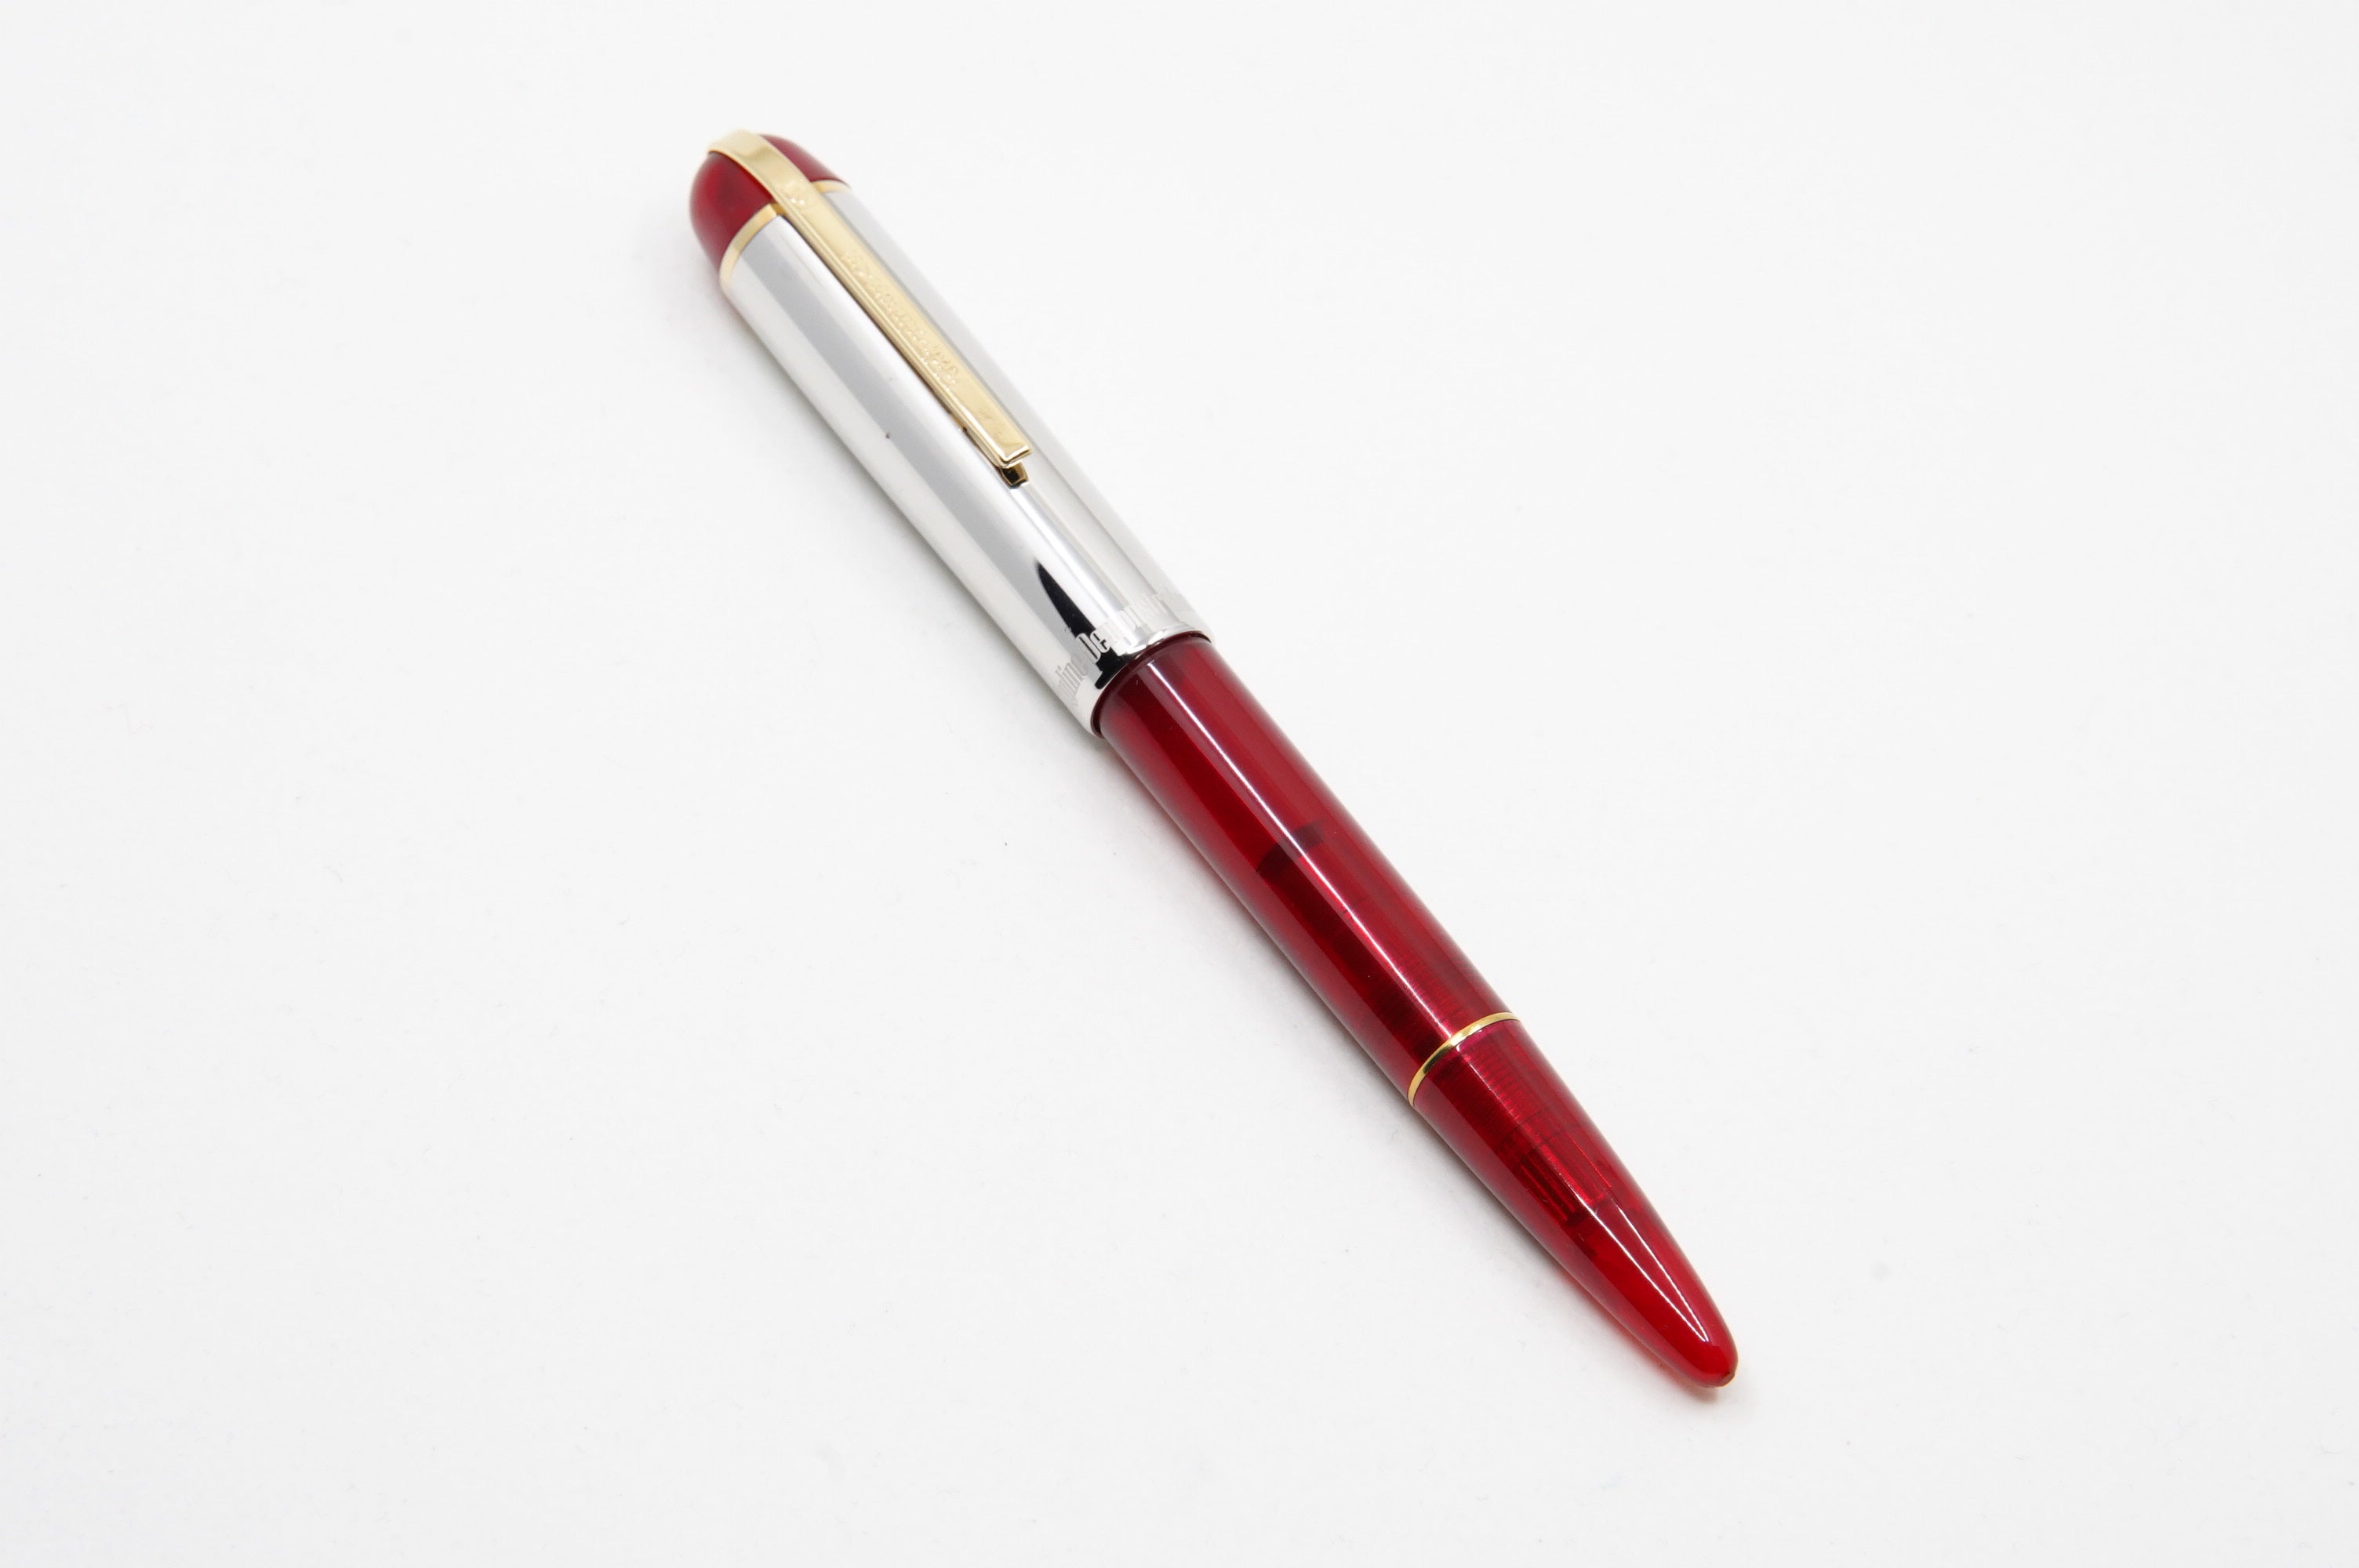 Wahl Eversharp Skyline FP Red Demo - The iconic SKYLINE created by Henry Dreyfus in 1939